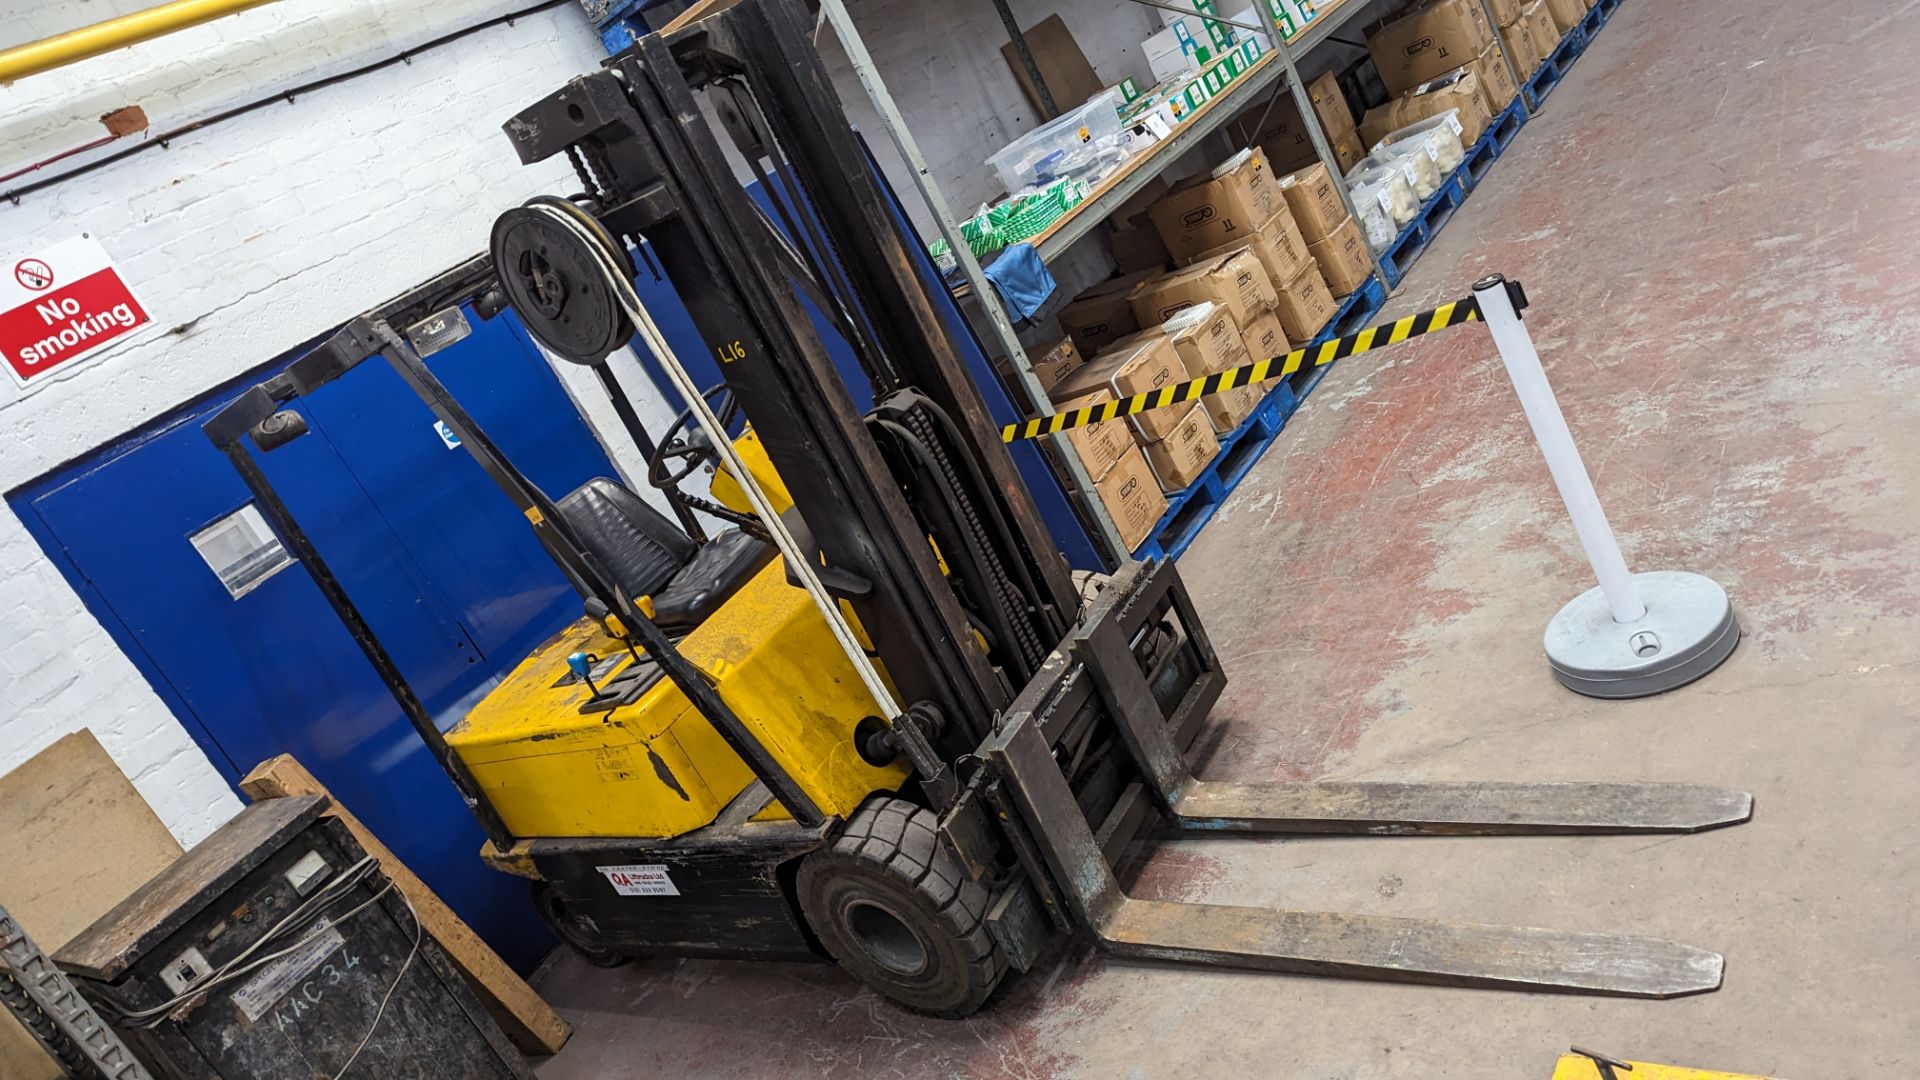 Clarke Engineering electric forklift truck, model EM20, including charger. The truck features side